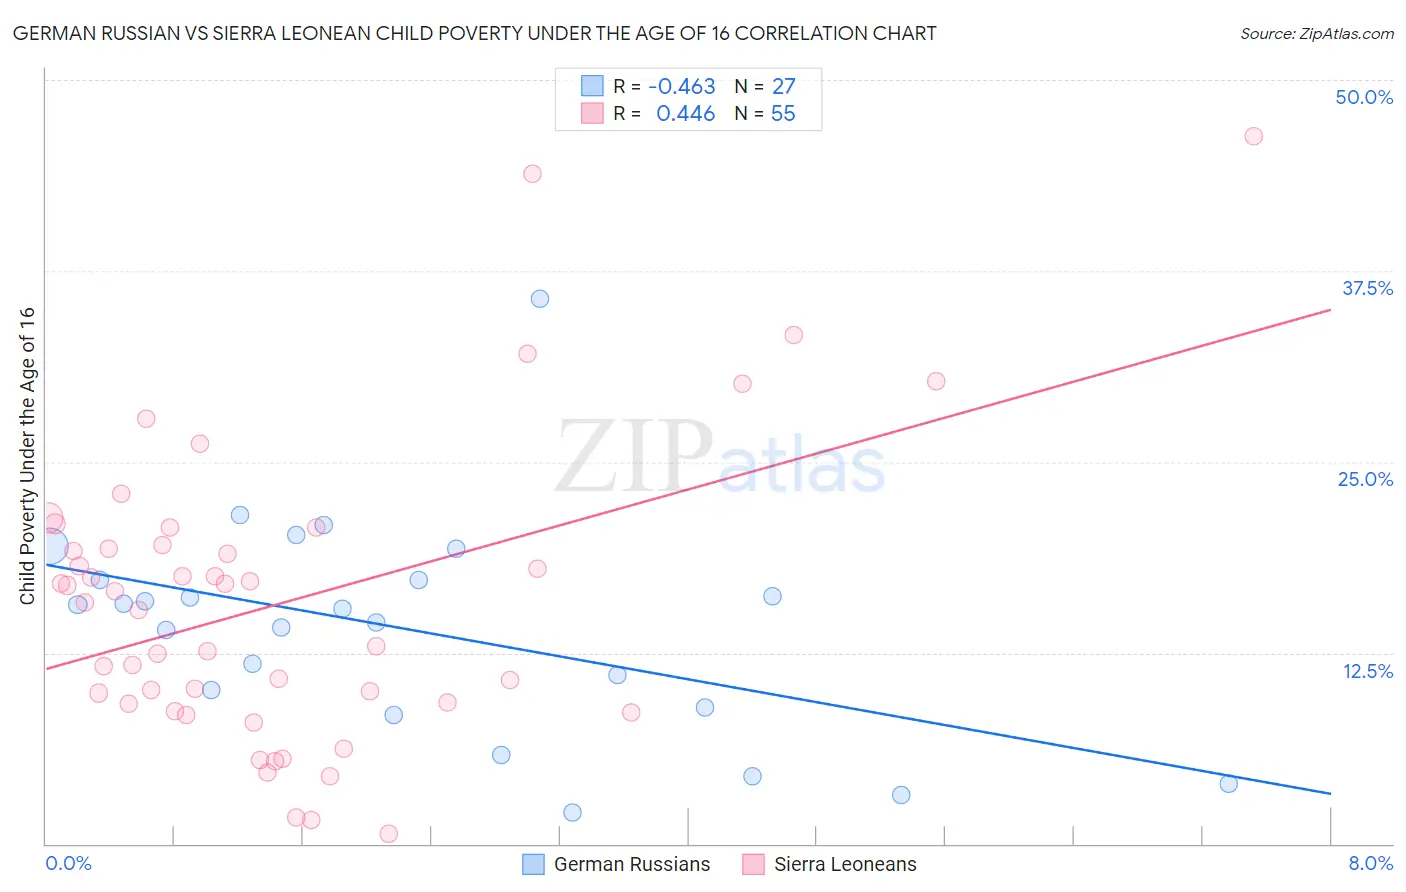 German Russian vs Sierra Leonean Child Poverty Under the Age of 16